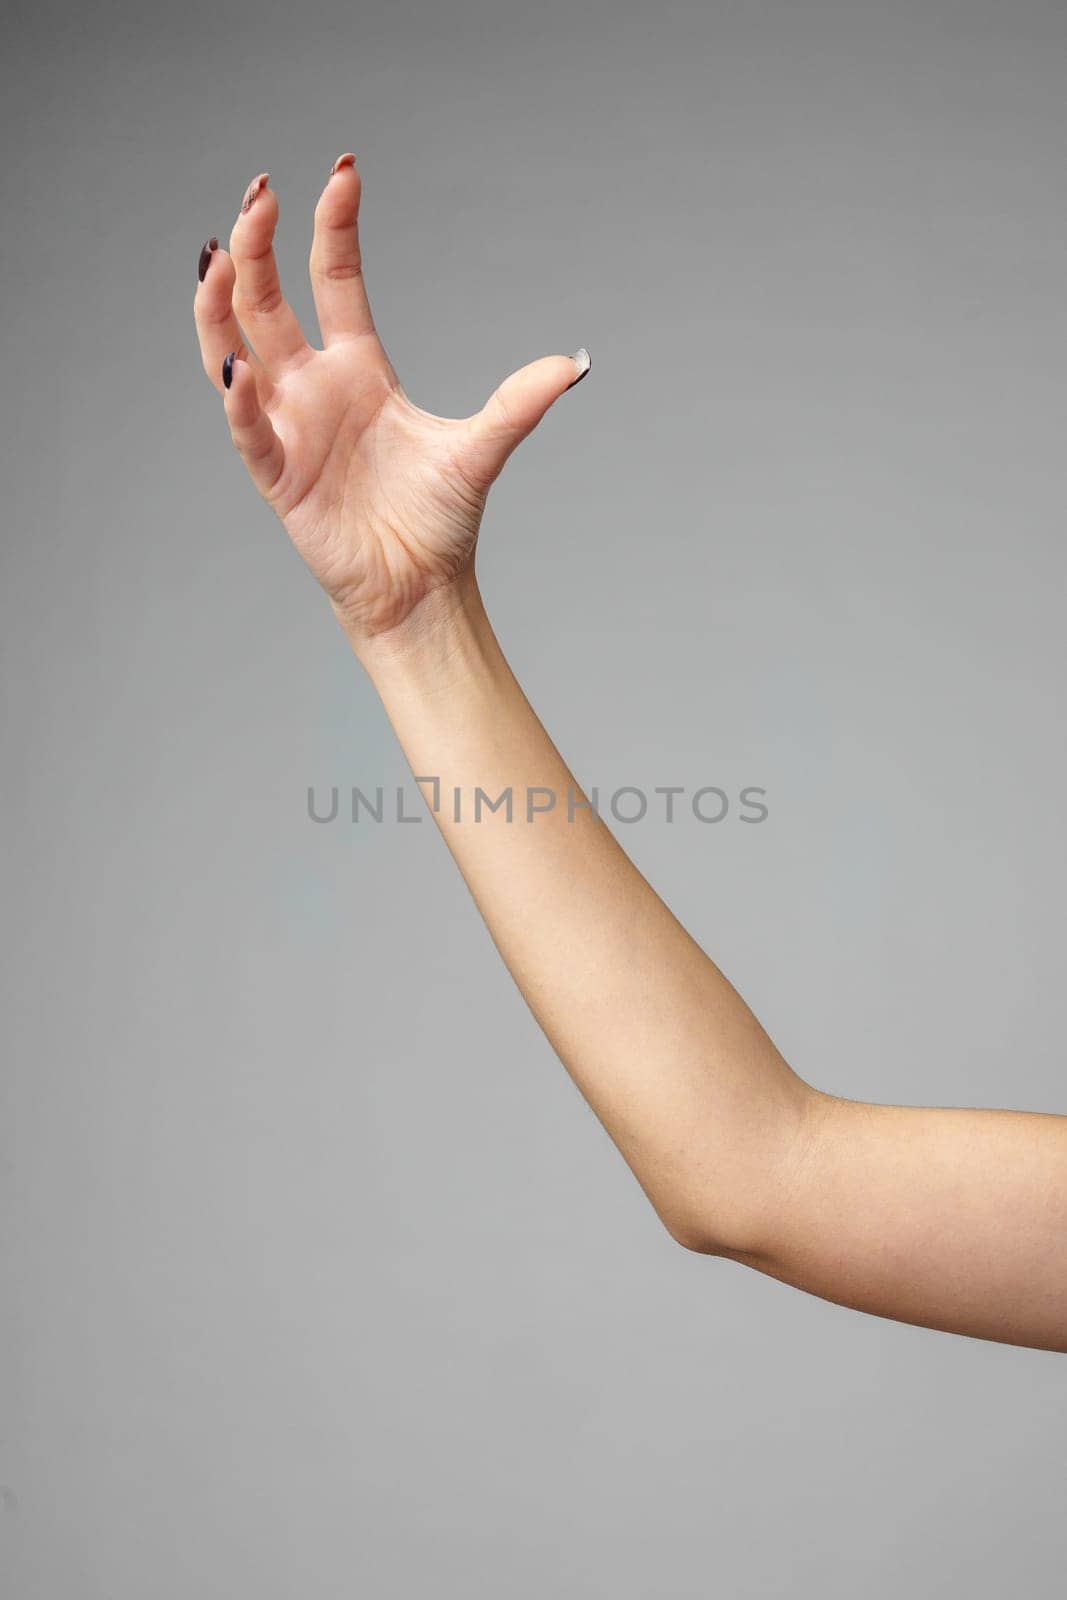 An outstretched arm with a relaxed hand and splayed fingers is captured against a neutral gray backdrop. The light highlights the contours and the natural complexion of the skin, showcasing a gesture that could imply reaching out or offering.